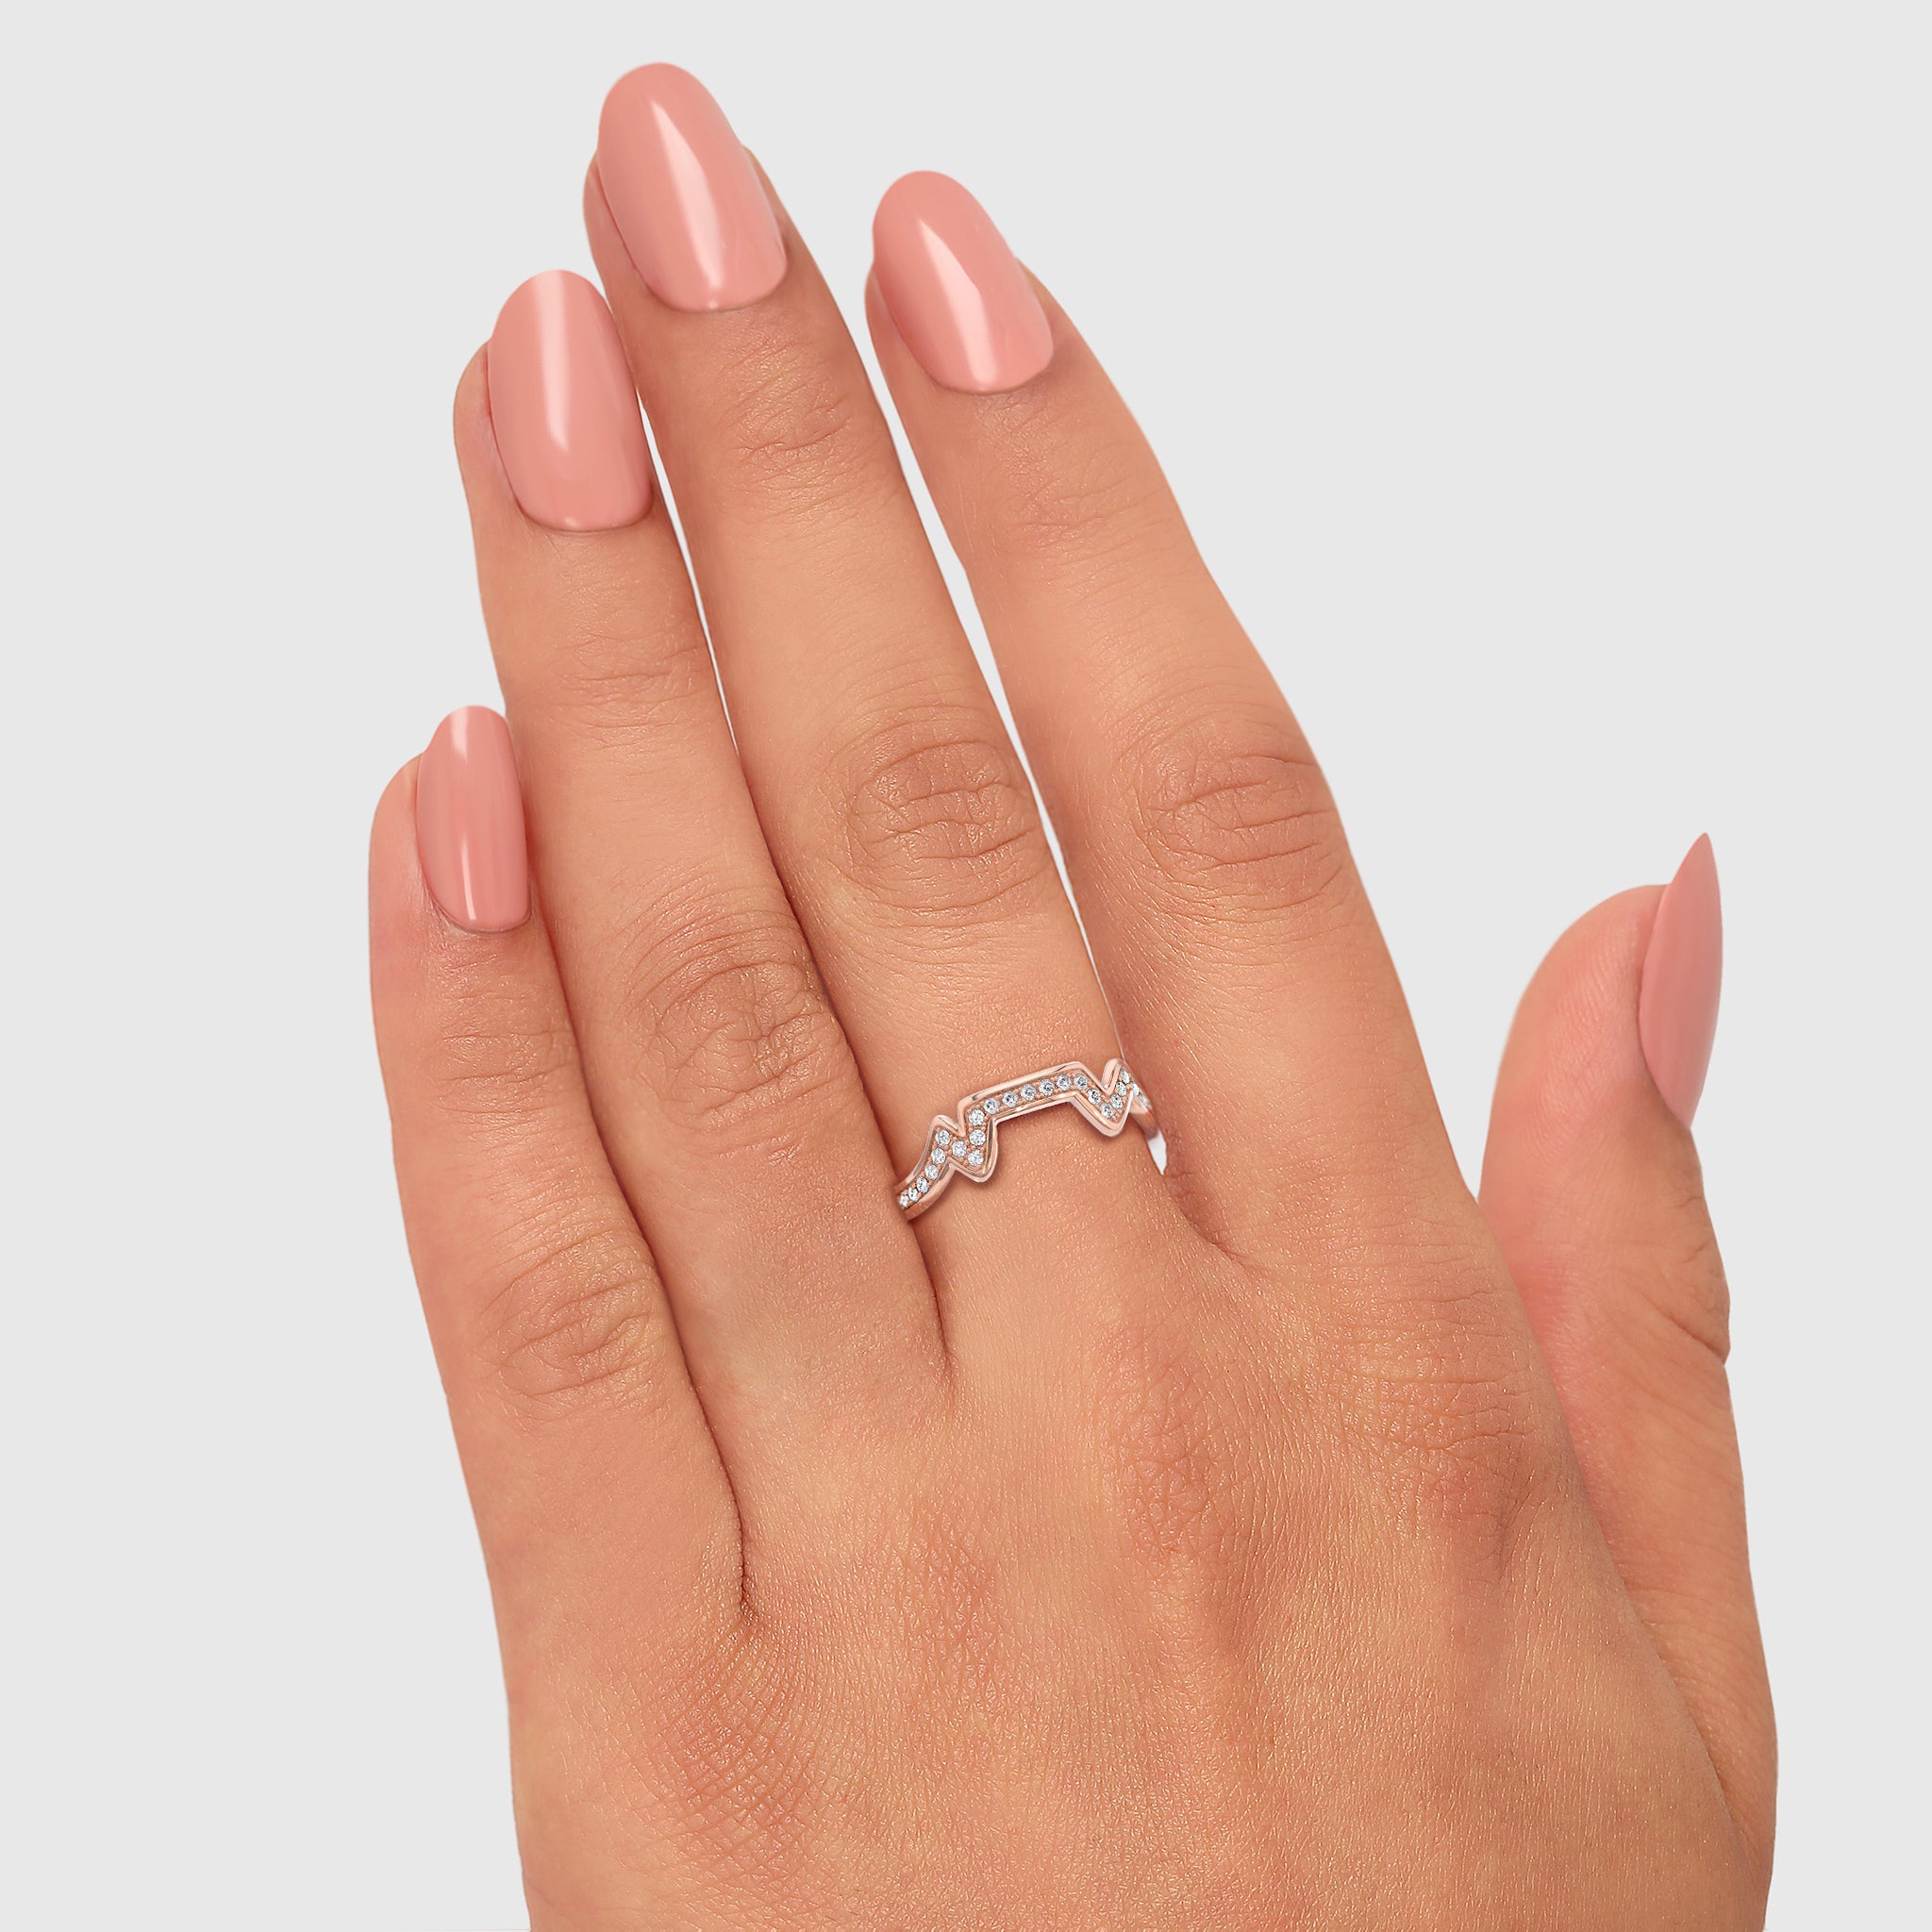 Shimansky - Women Wearing the Table Mountain Pave Diamond Ring Crafted in 14K Rose Gold